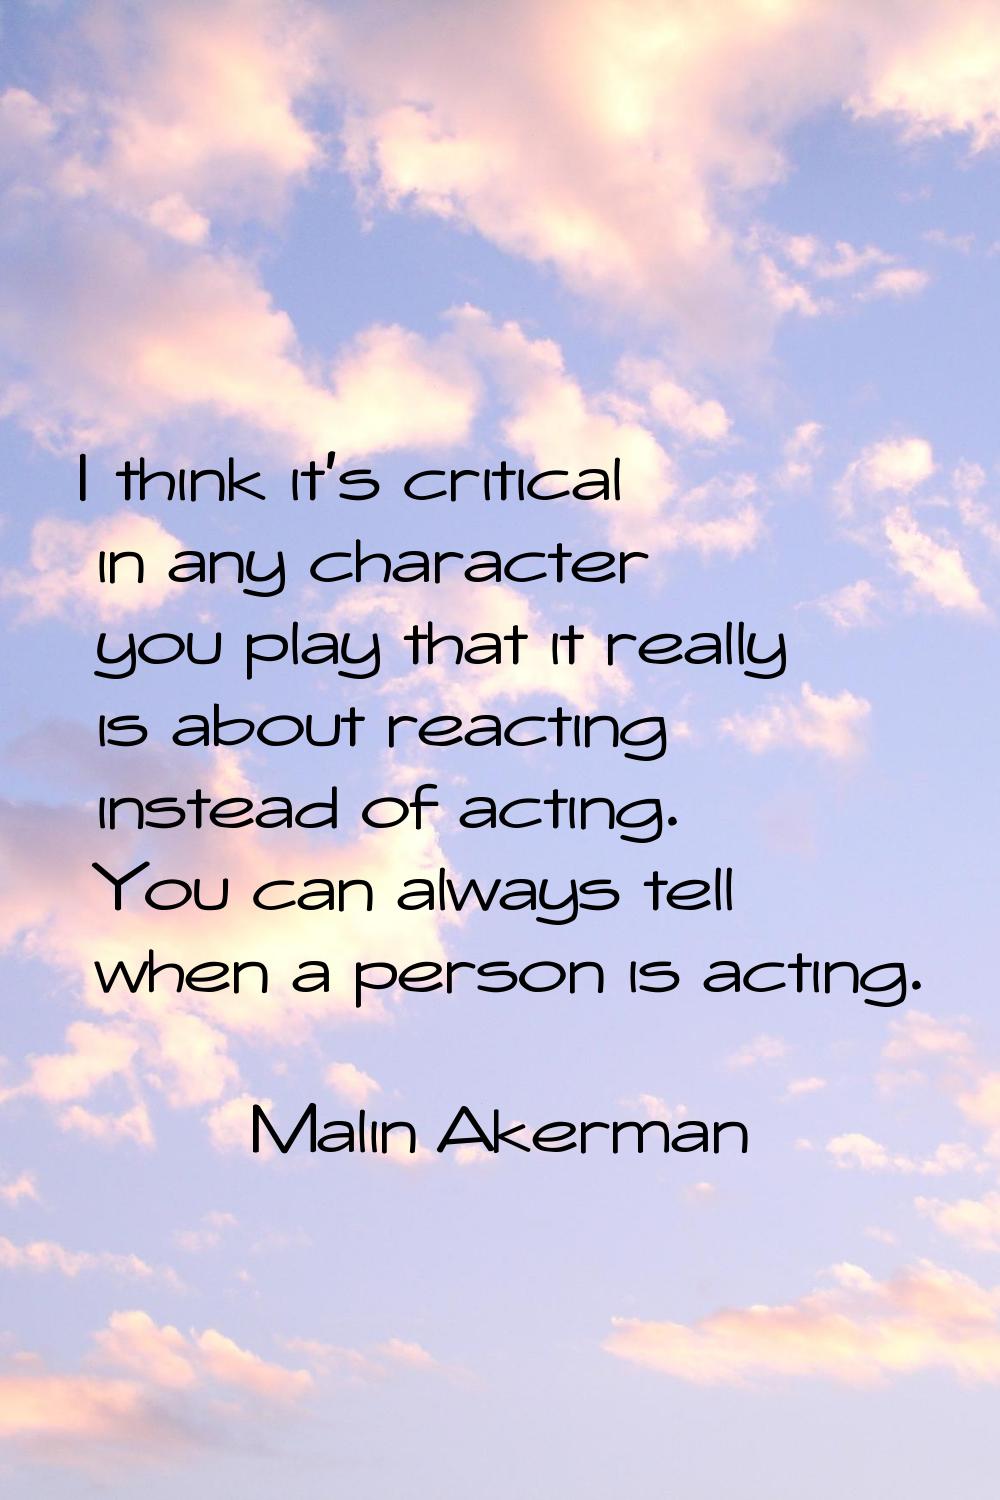 I think it's critical in any character you play that it really is about reacting instead of acting.